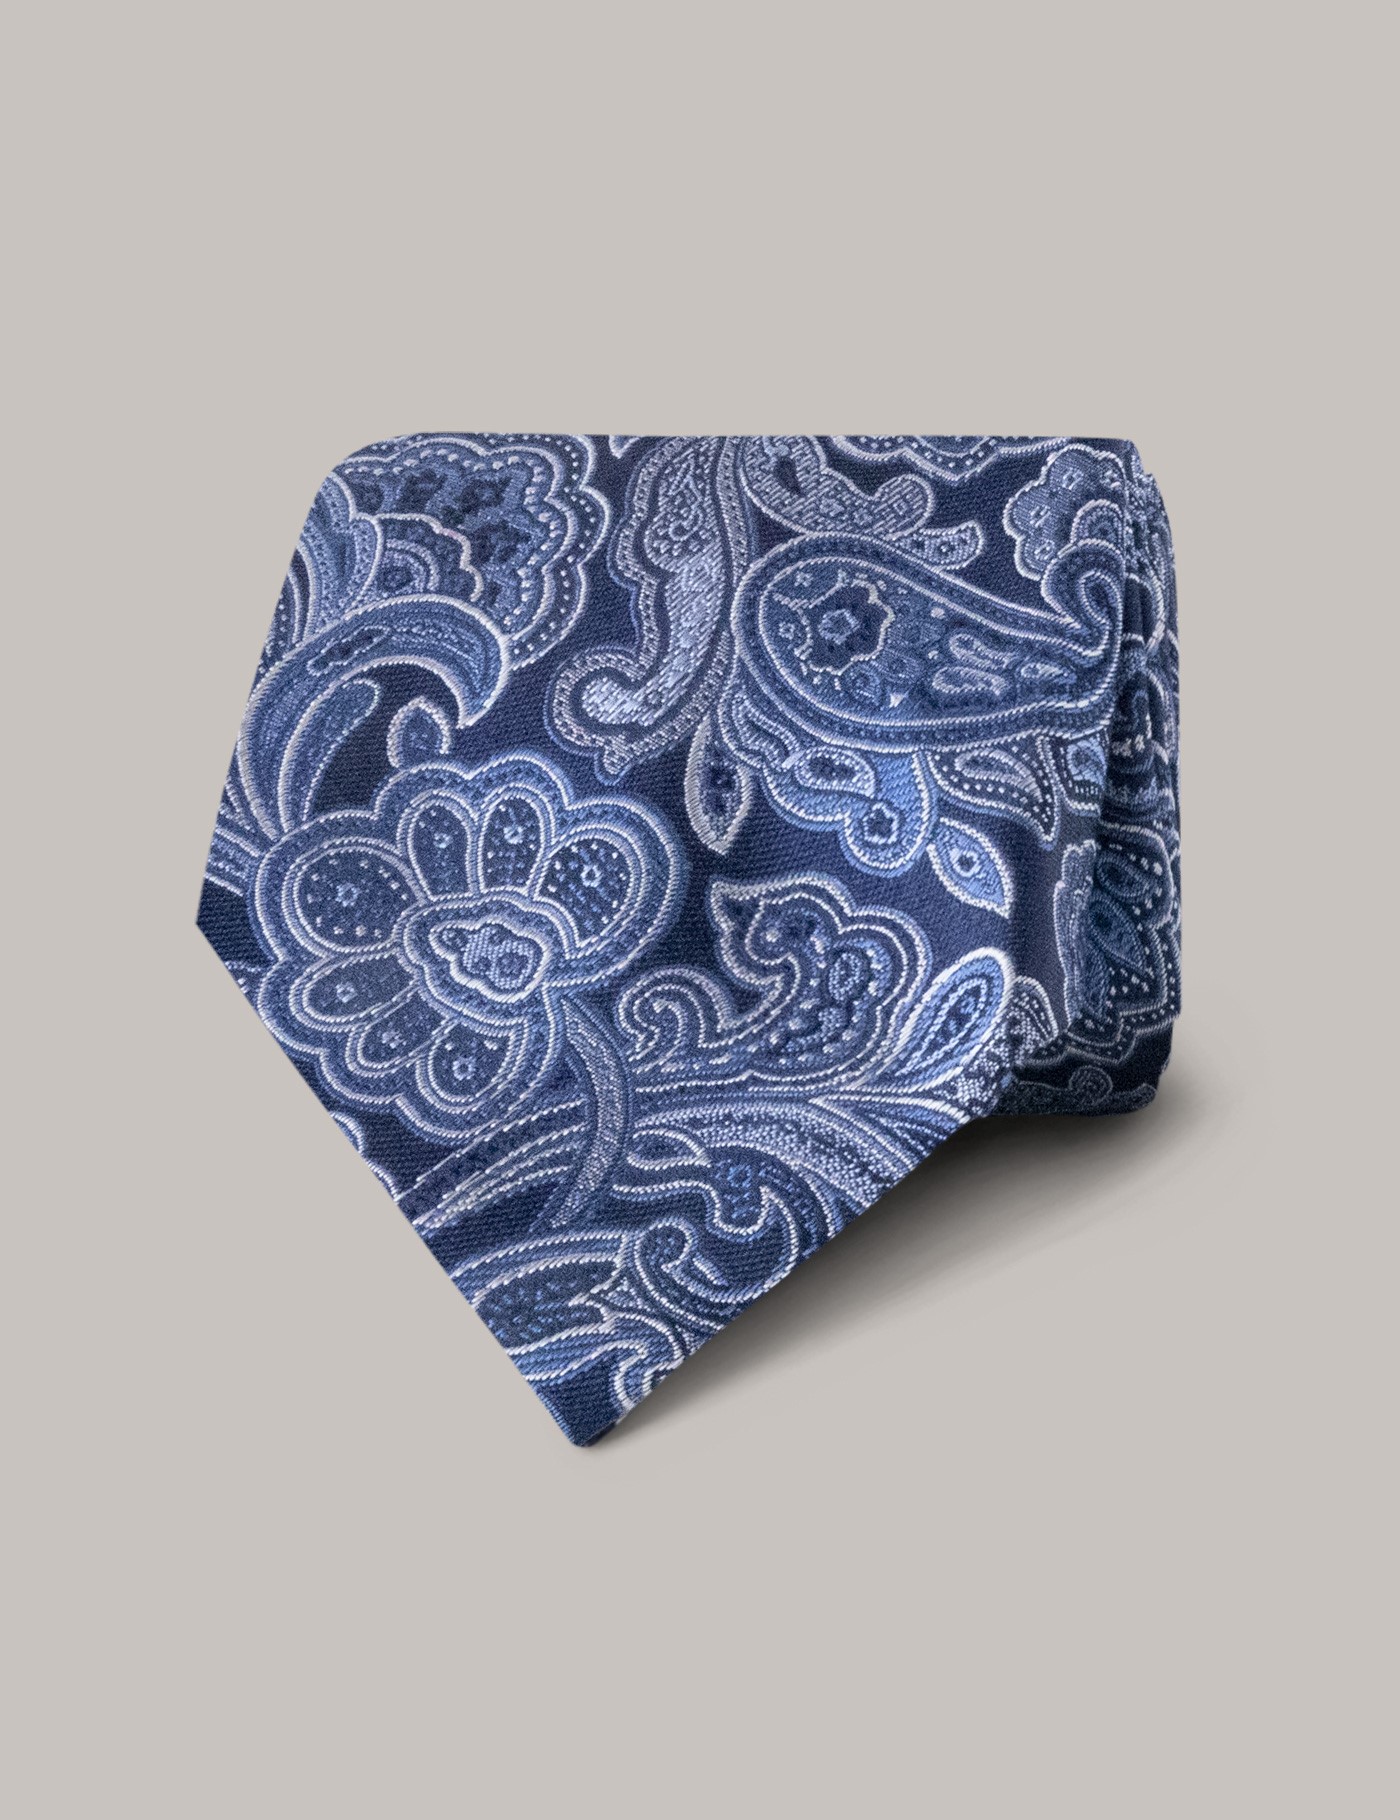 hawes & curtis navy & blue two-tone paisley tie - 100% silk